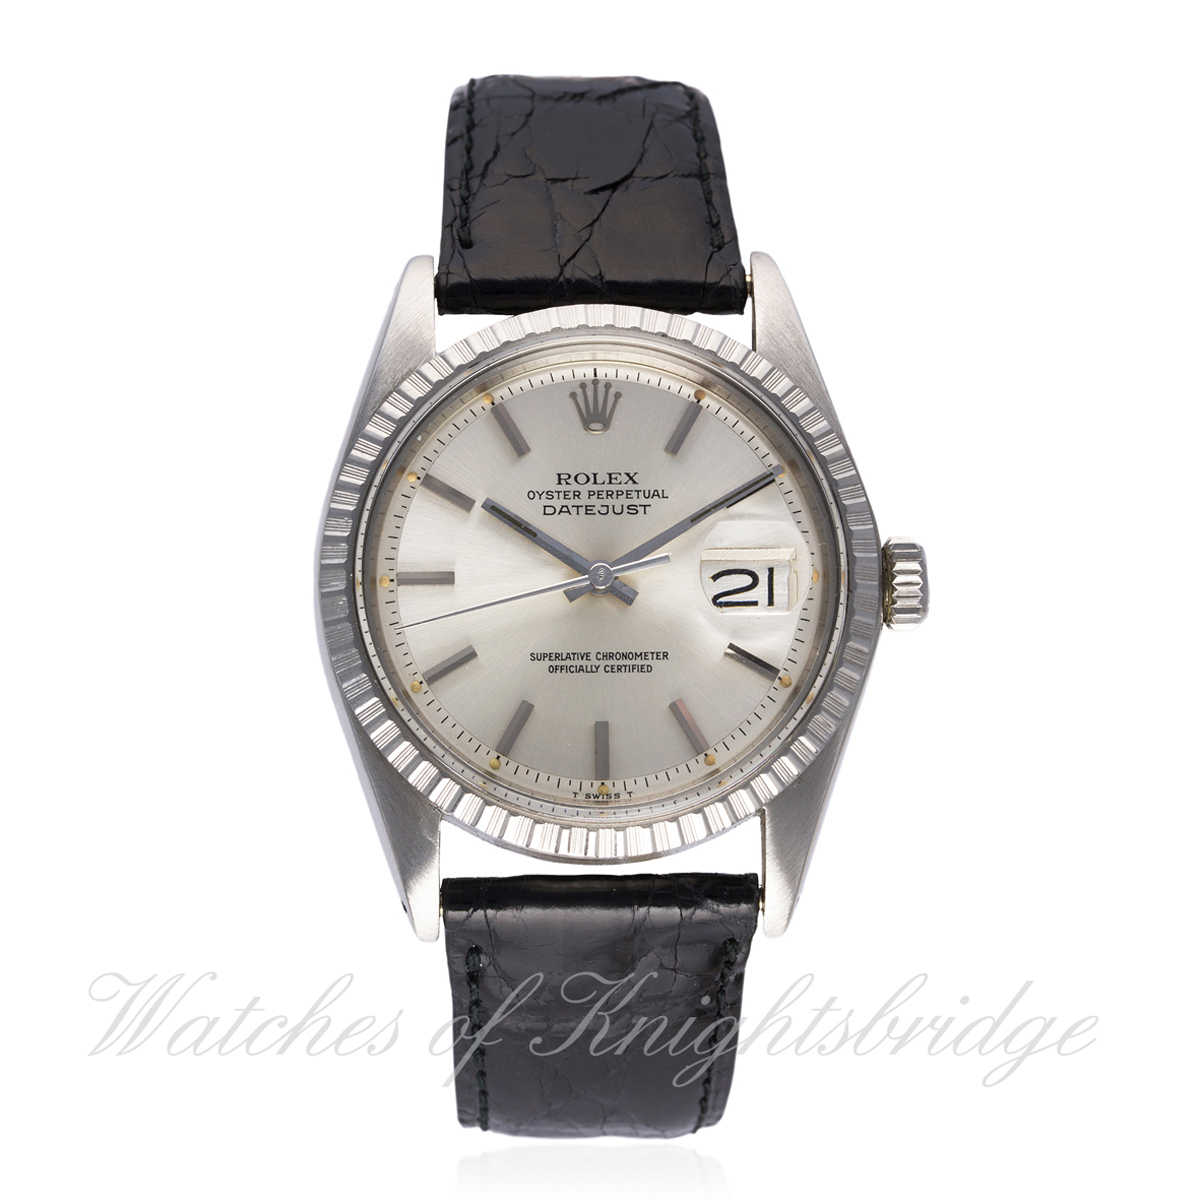 A GENTLEMAN'S STAINLESS STEEL ROLEX OYSTER PERPETUAL DATEJUST WRIST WATCH DATED 1974, REF. 1603 WITH